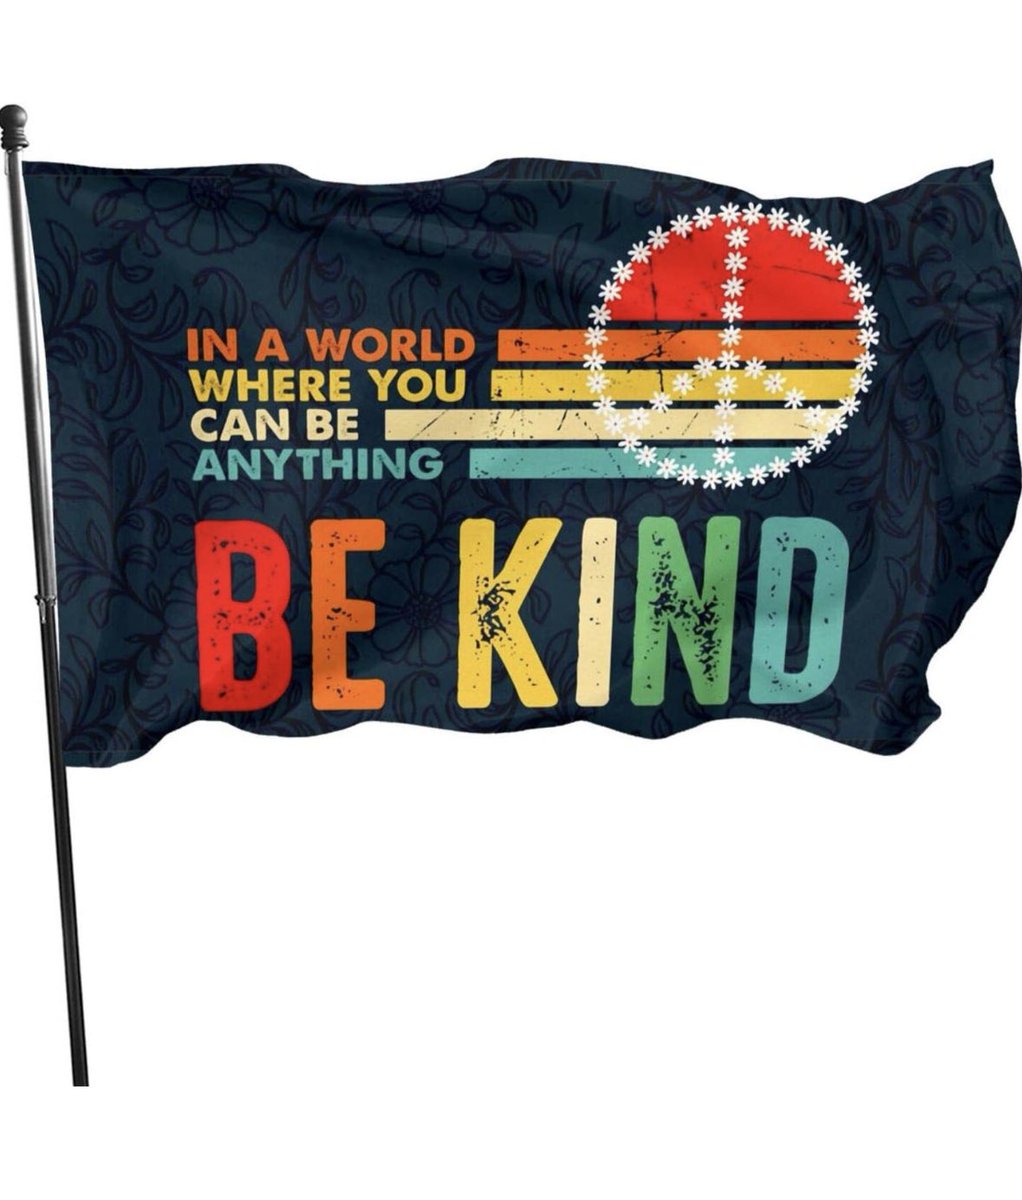 Conquer the world with your smile,
then raise the flag of kindness.

#BeKind
#Kindnessforthewin
 #acallforkindness